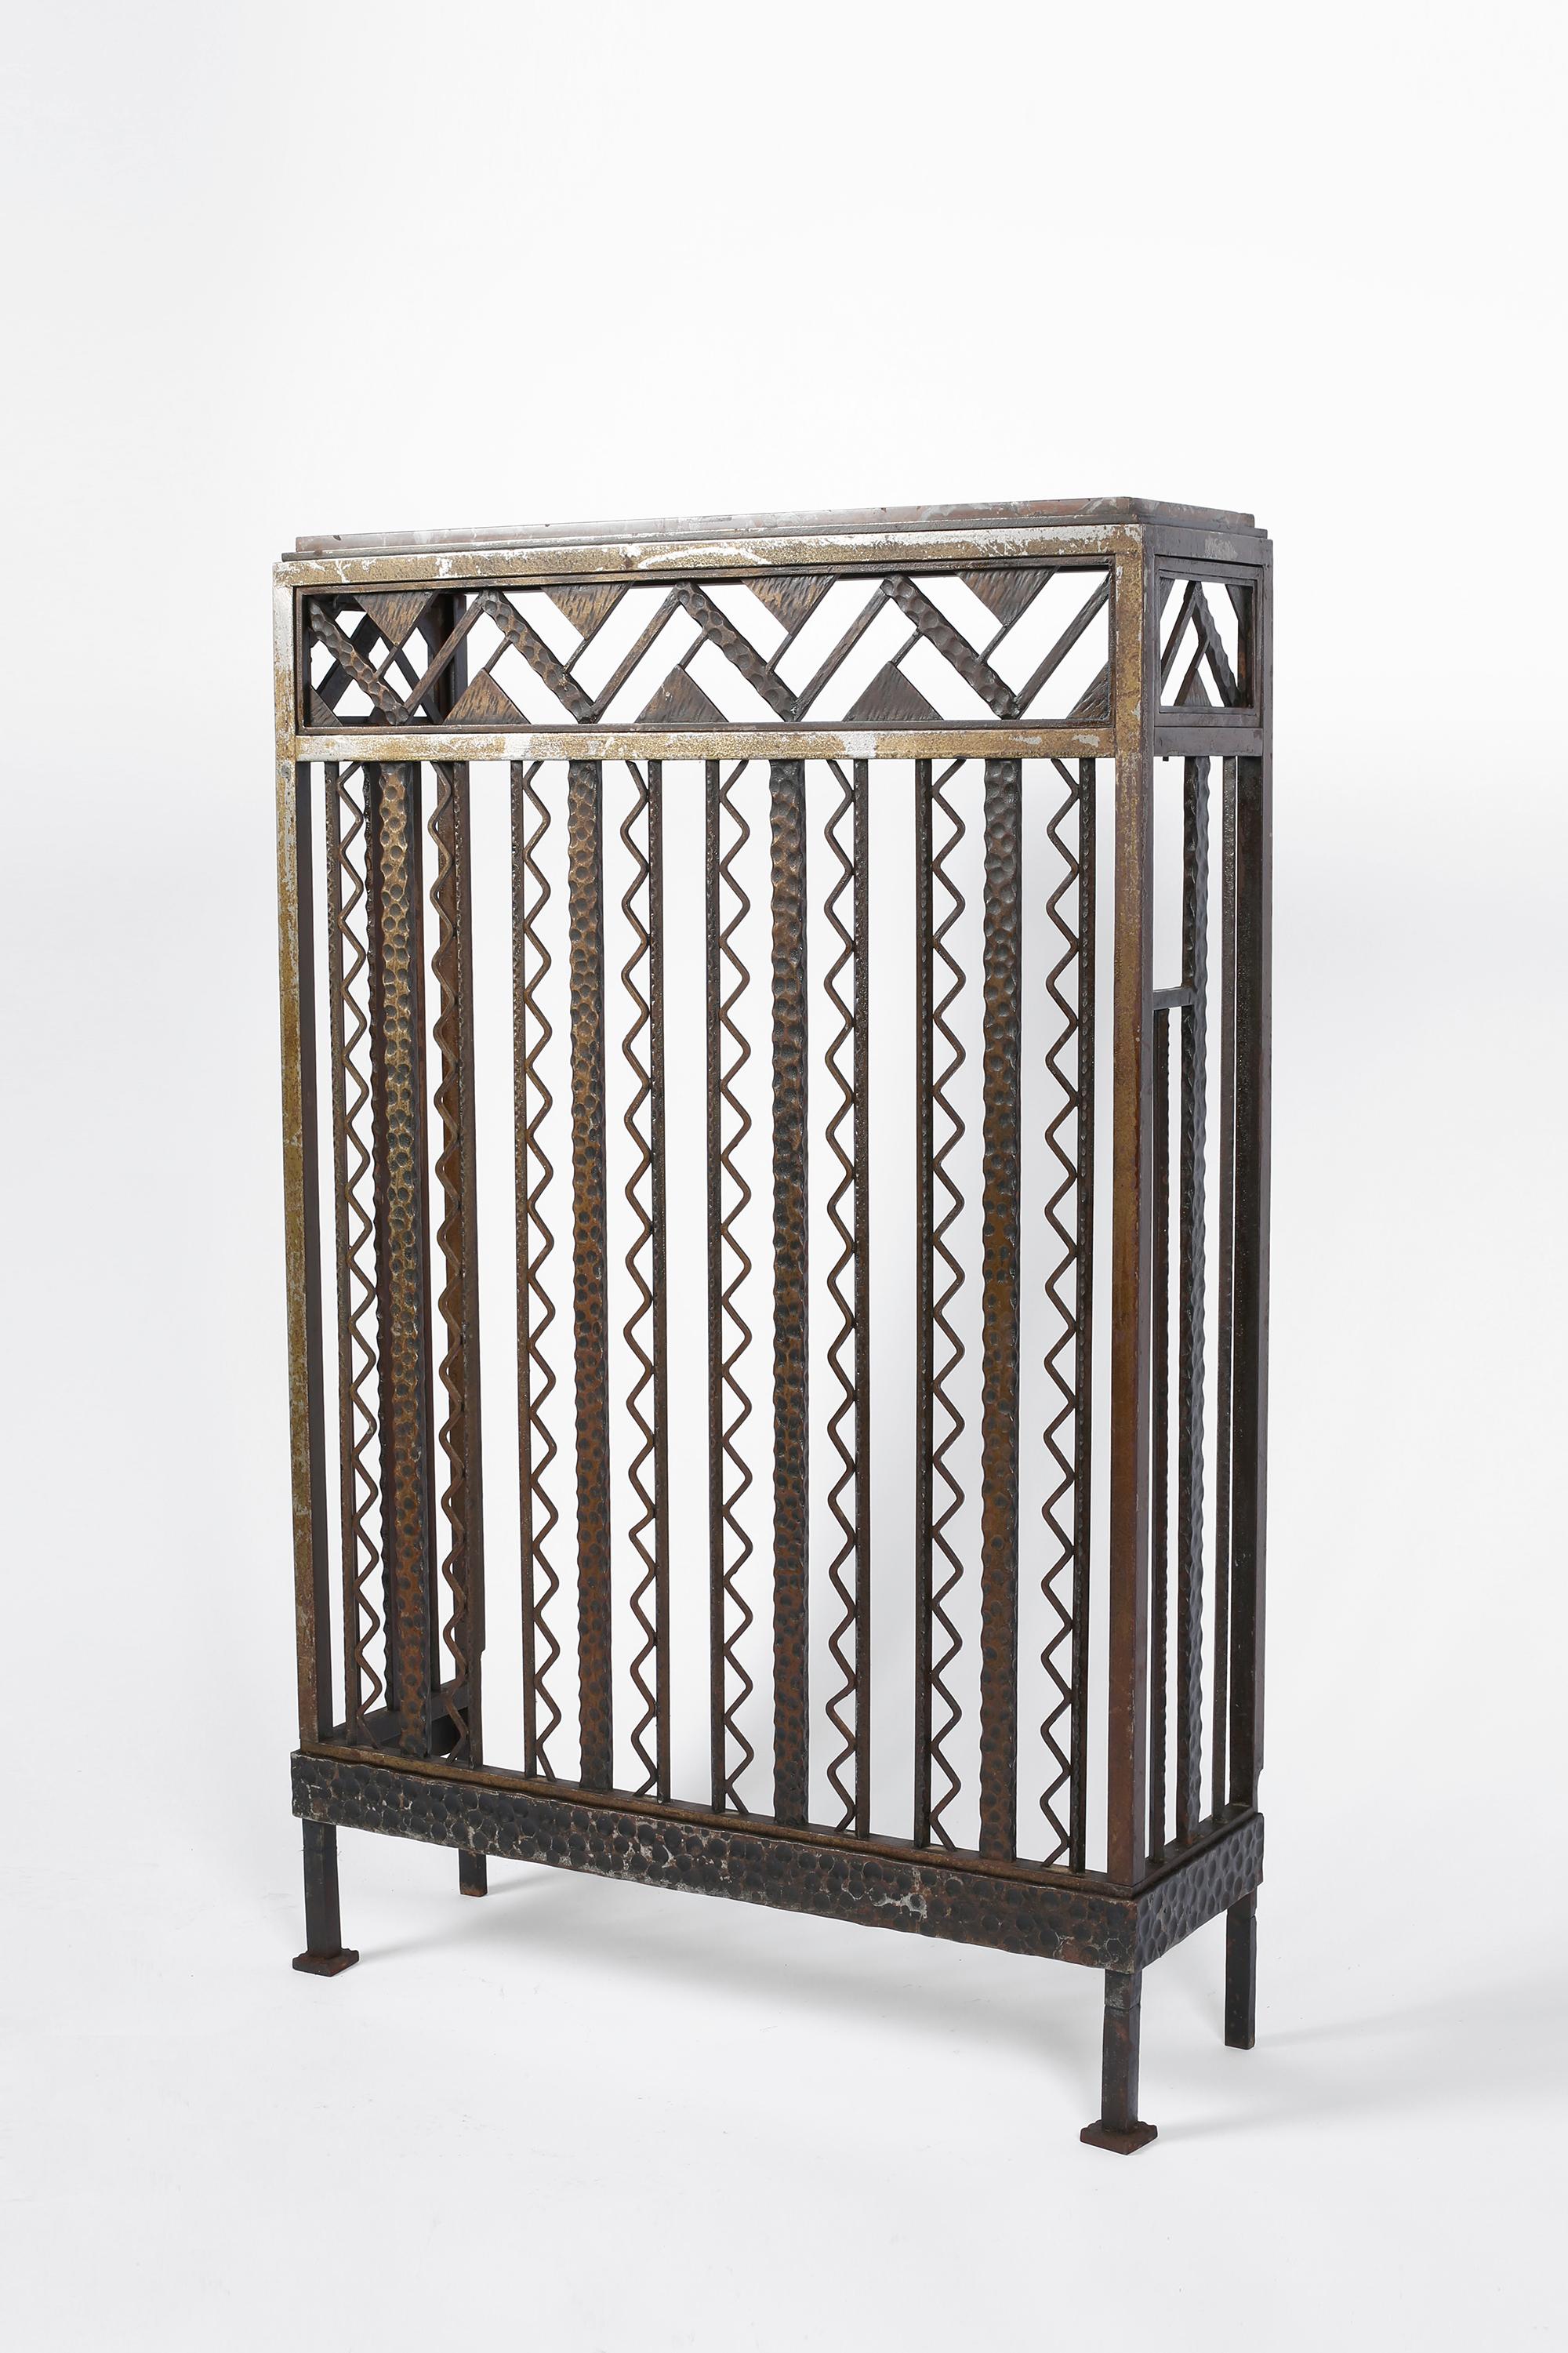 A fine Art Deco forged iron wall console table with original Pyrenean Griotte marble top. The geometric frieze decorated with differing hammer techniques, along with the vertical bars - punctuated by zig-zag detailing. Bold enough to be a